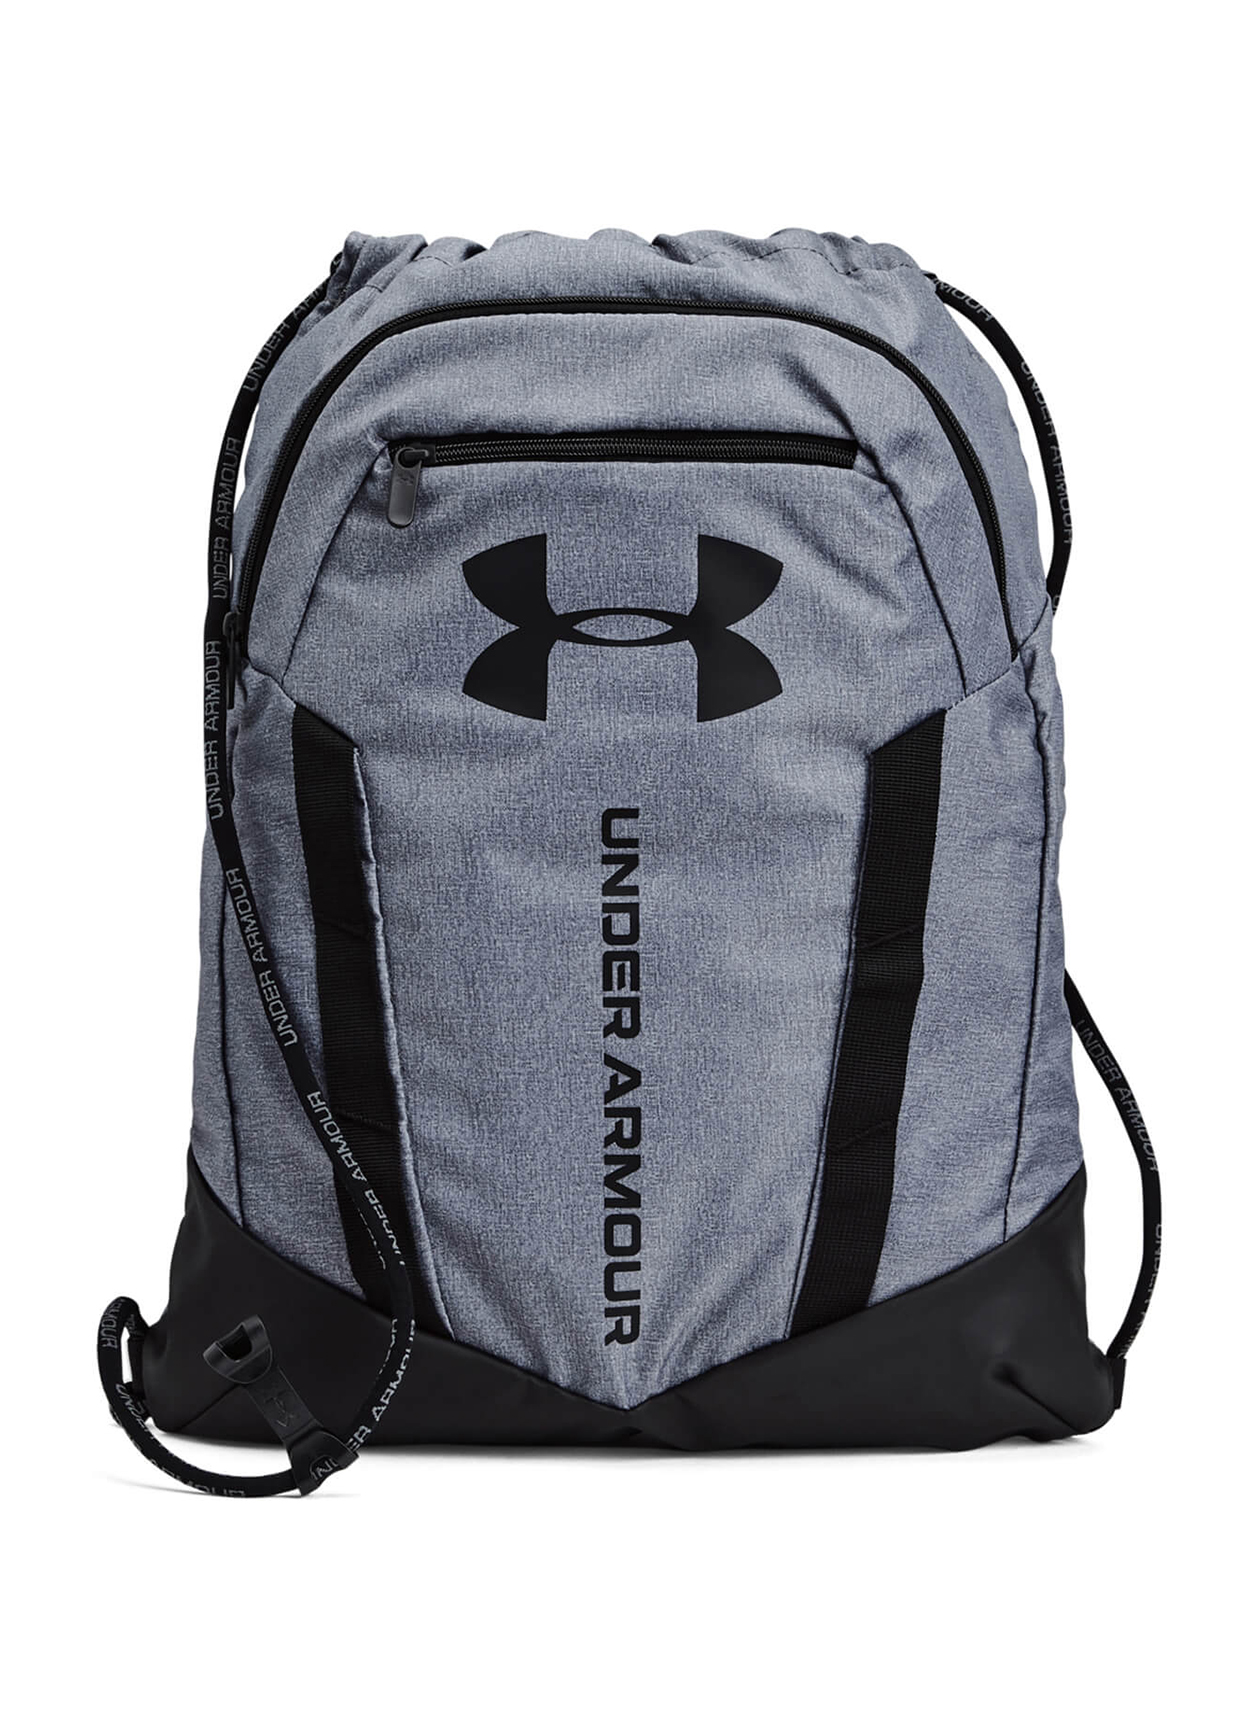 Under Armour Pitch Grey Undeniable Sack Pack